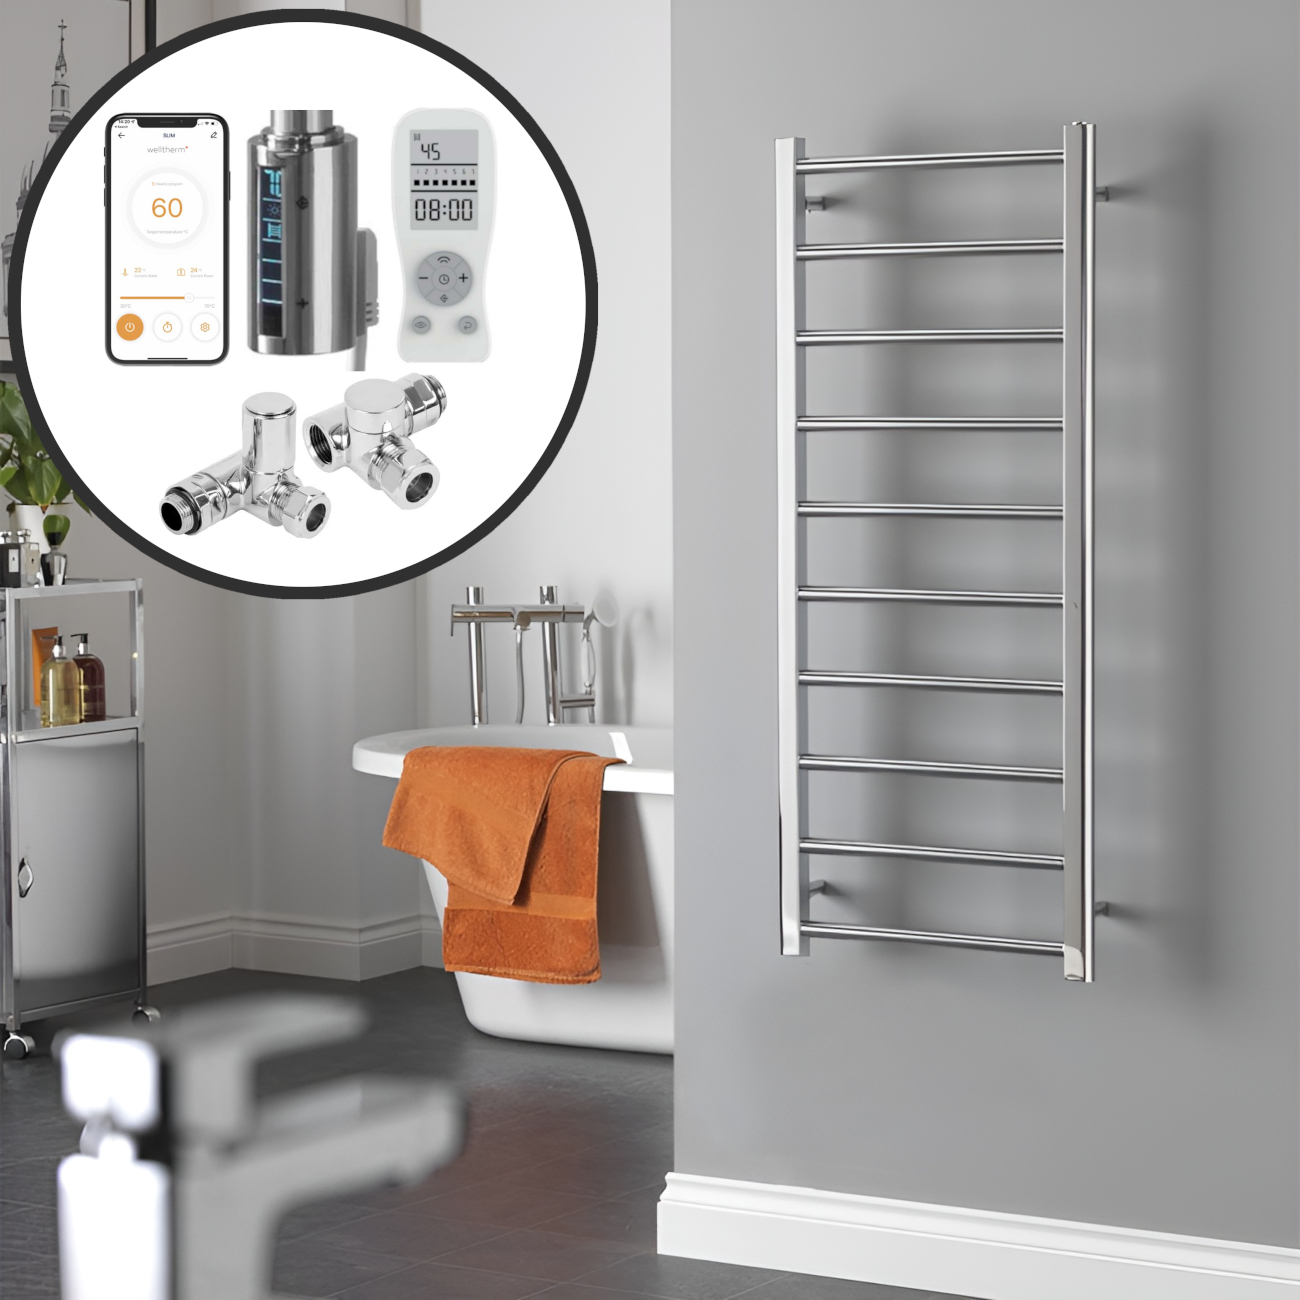 Alpine Chrome | Dual Fuel Towel Rail with Thermostat, Timer + WiFi Control Best Quality & Price, Energy Saving / Economic To Run Buy Online From Adax SolAire UK Shop